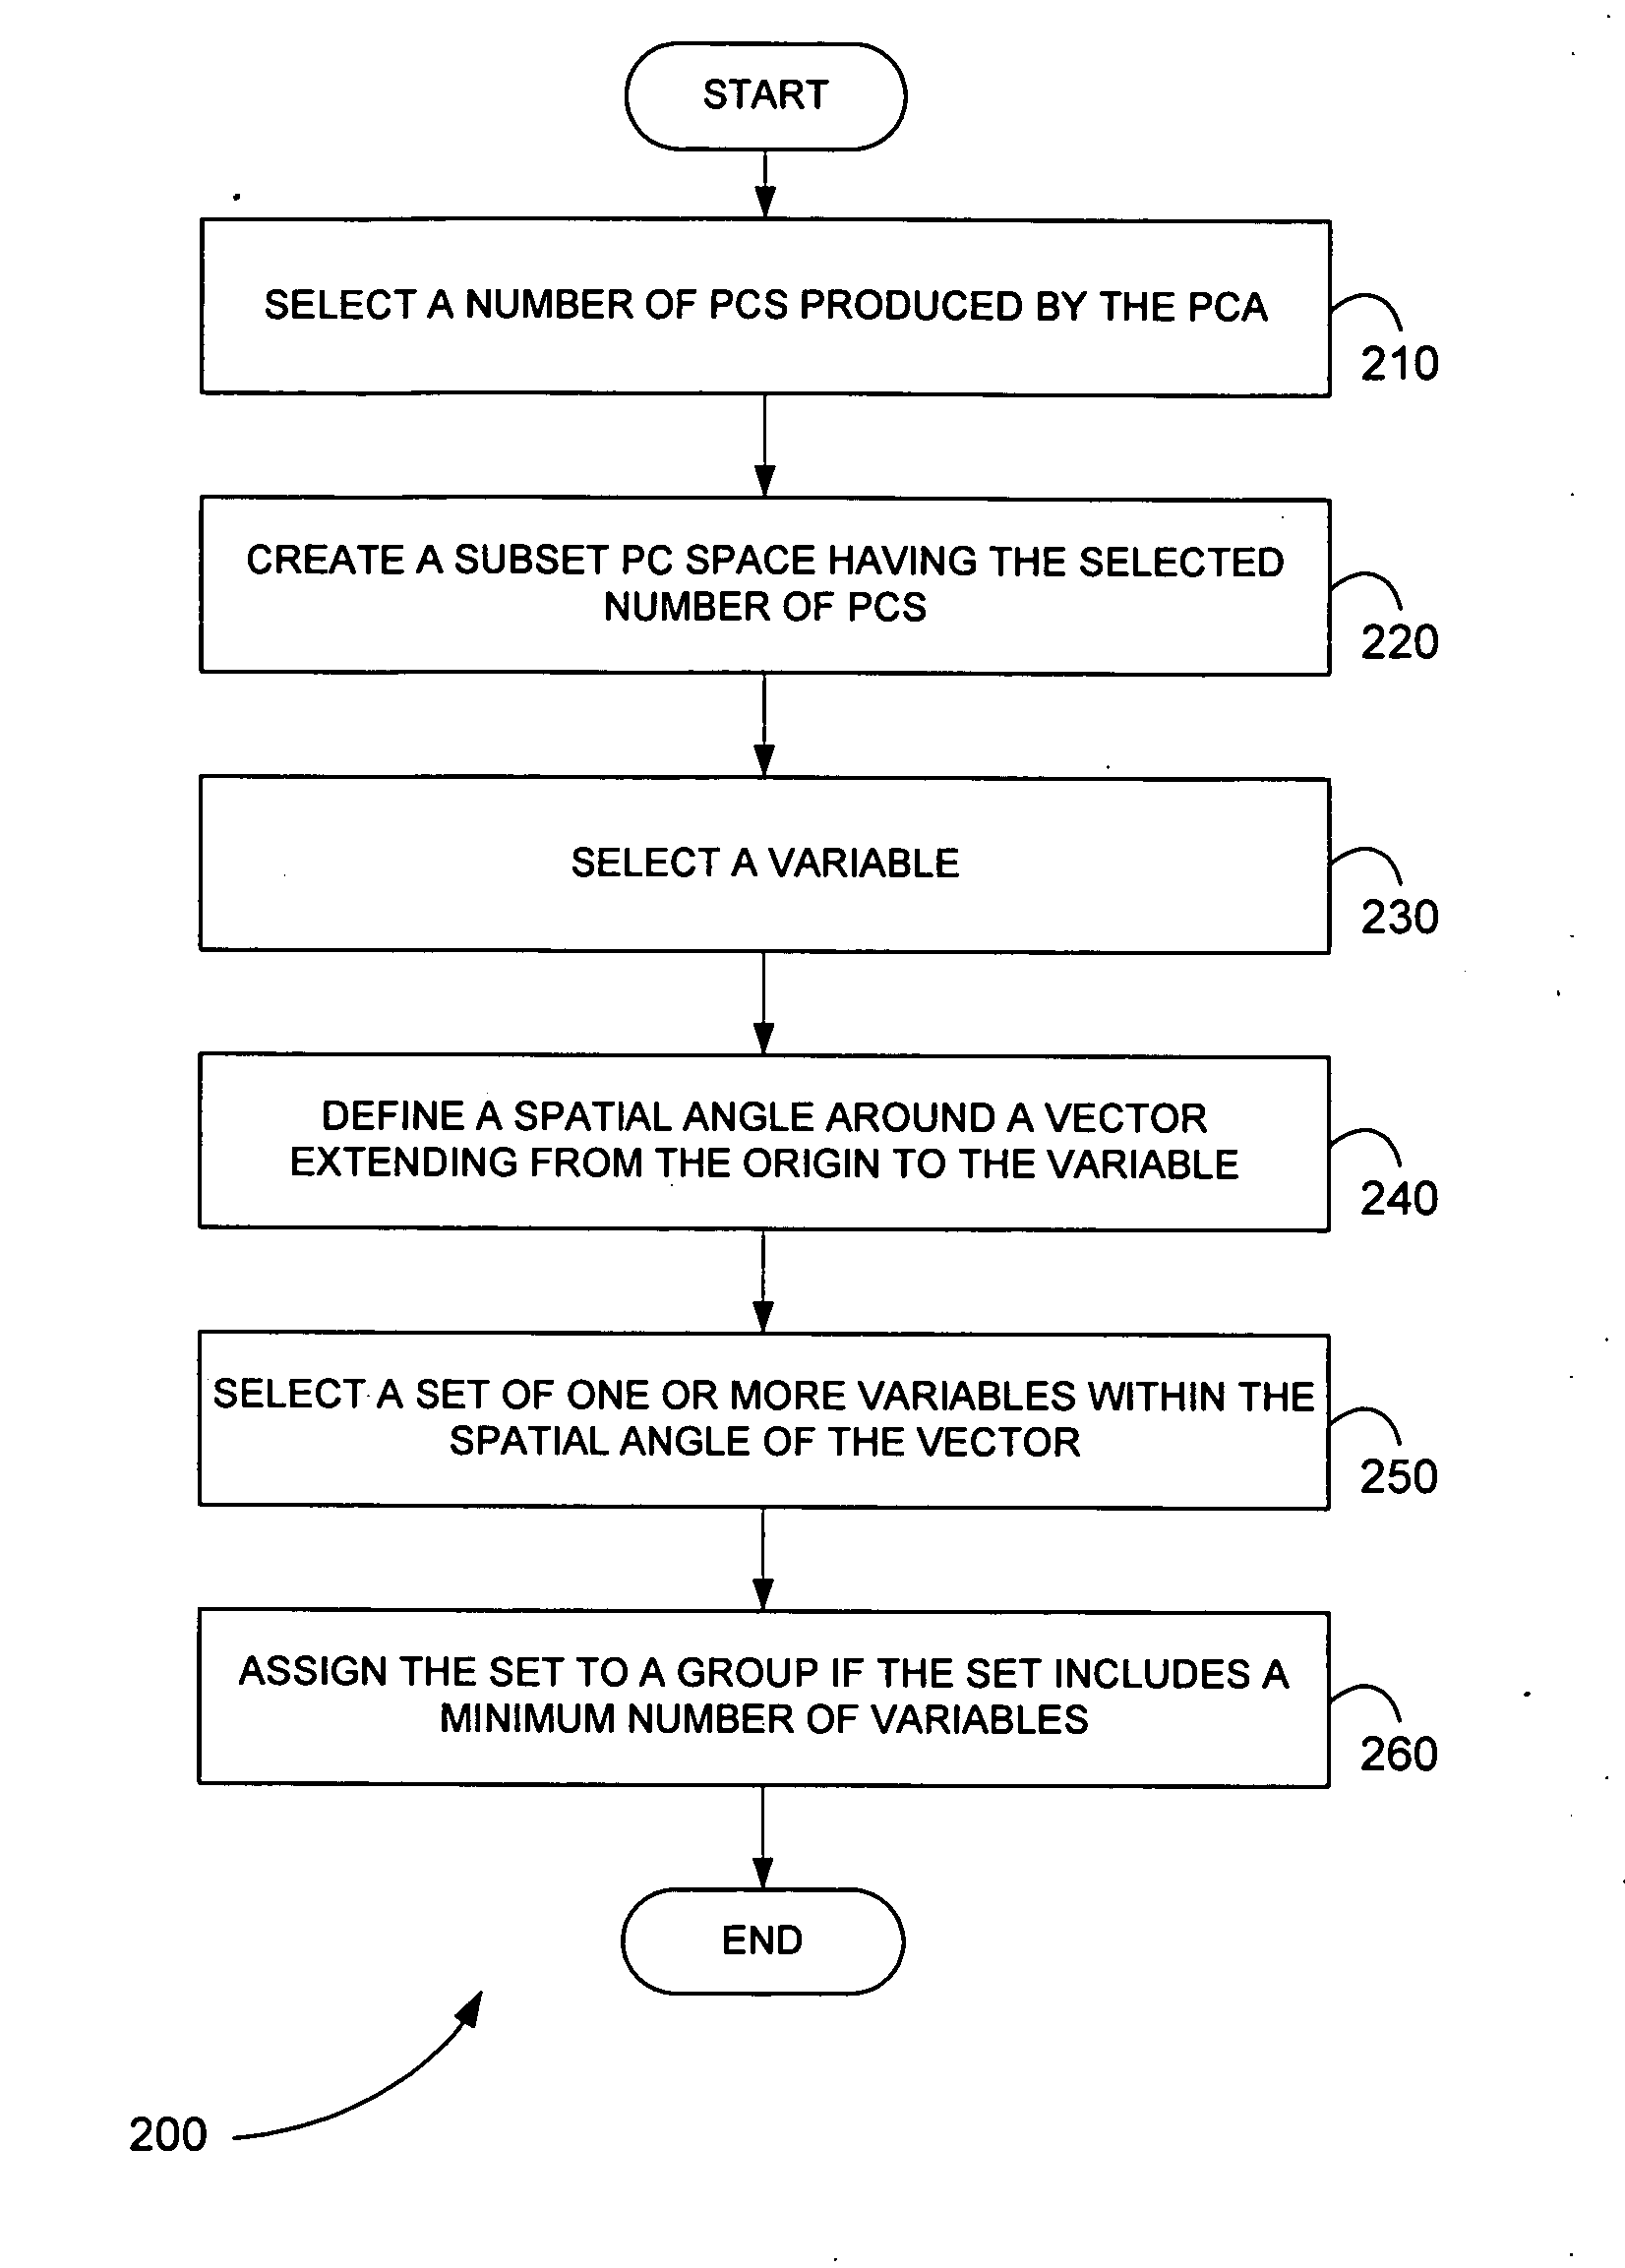 Systems and methods for identifying correlated variables in large amounts of data